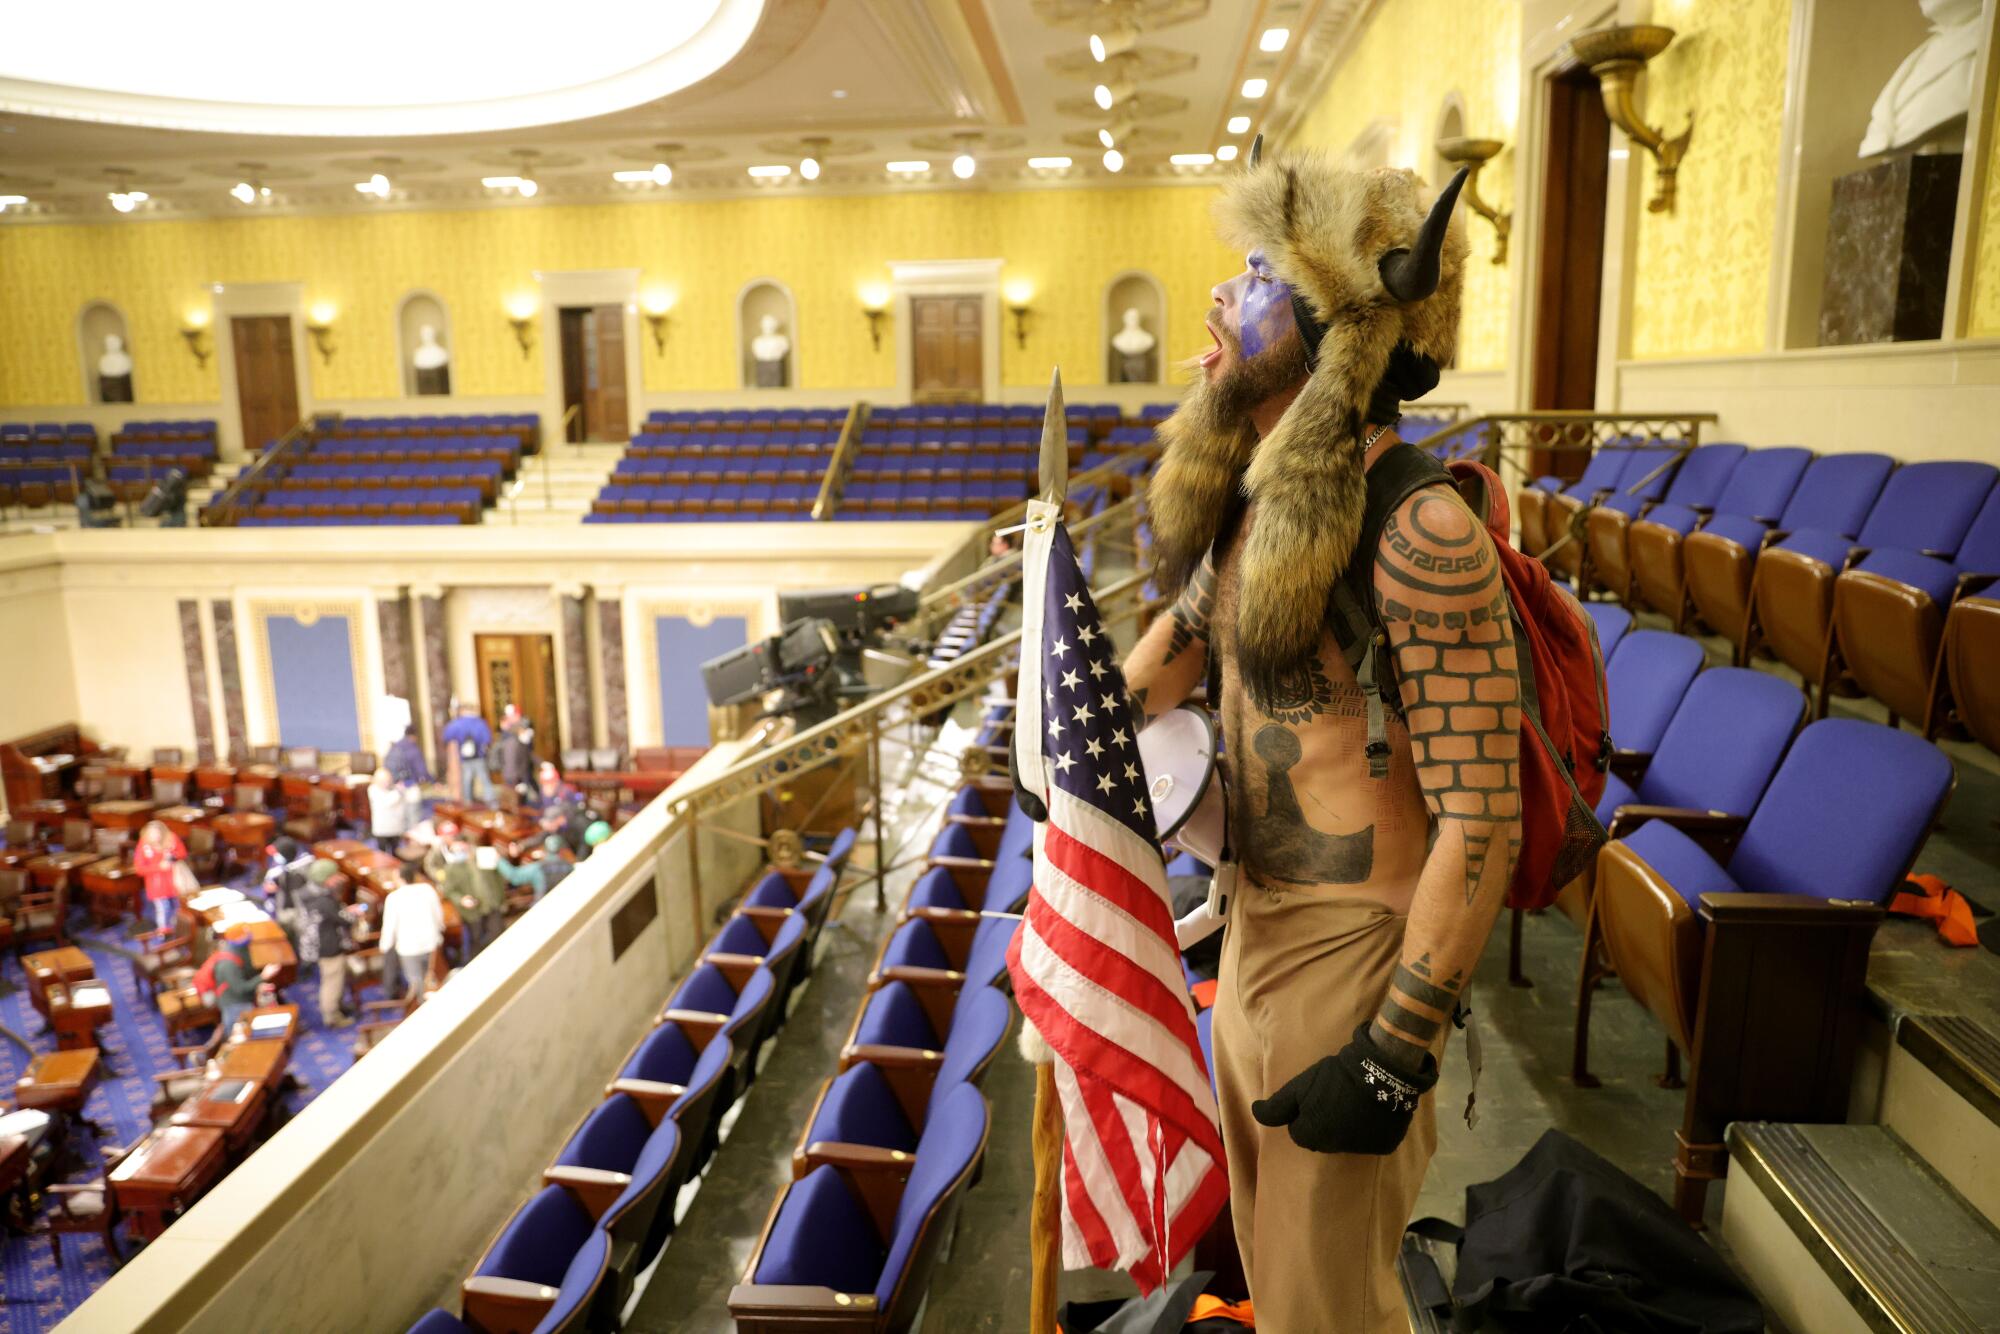 A man with tattoos and a fur headdress and flag stands, yelling, amid rows of seats in the Senate chamber.